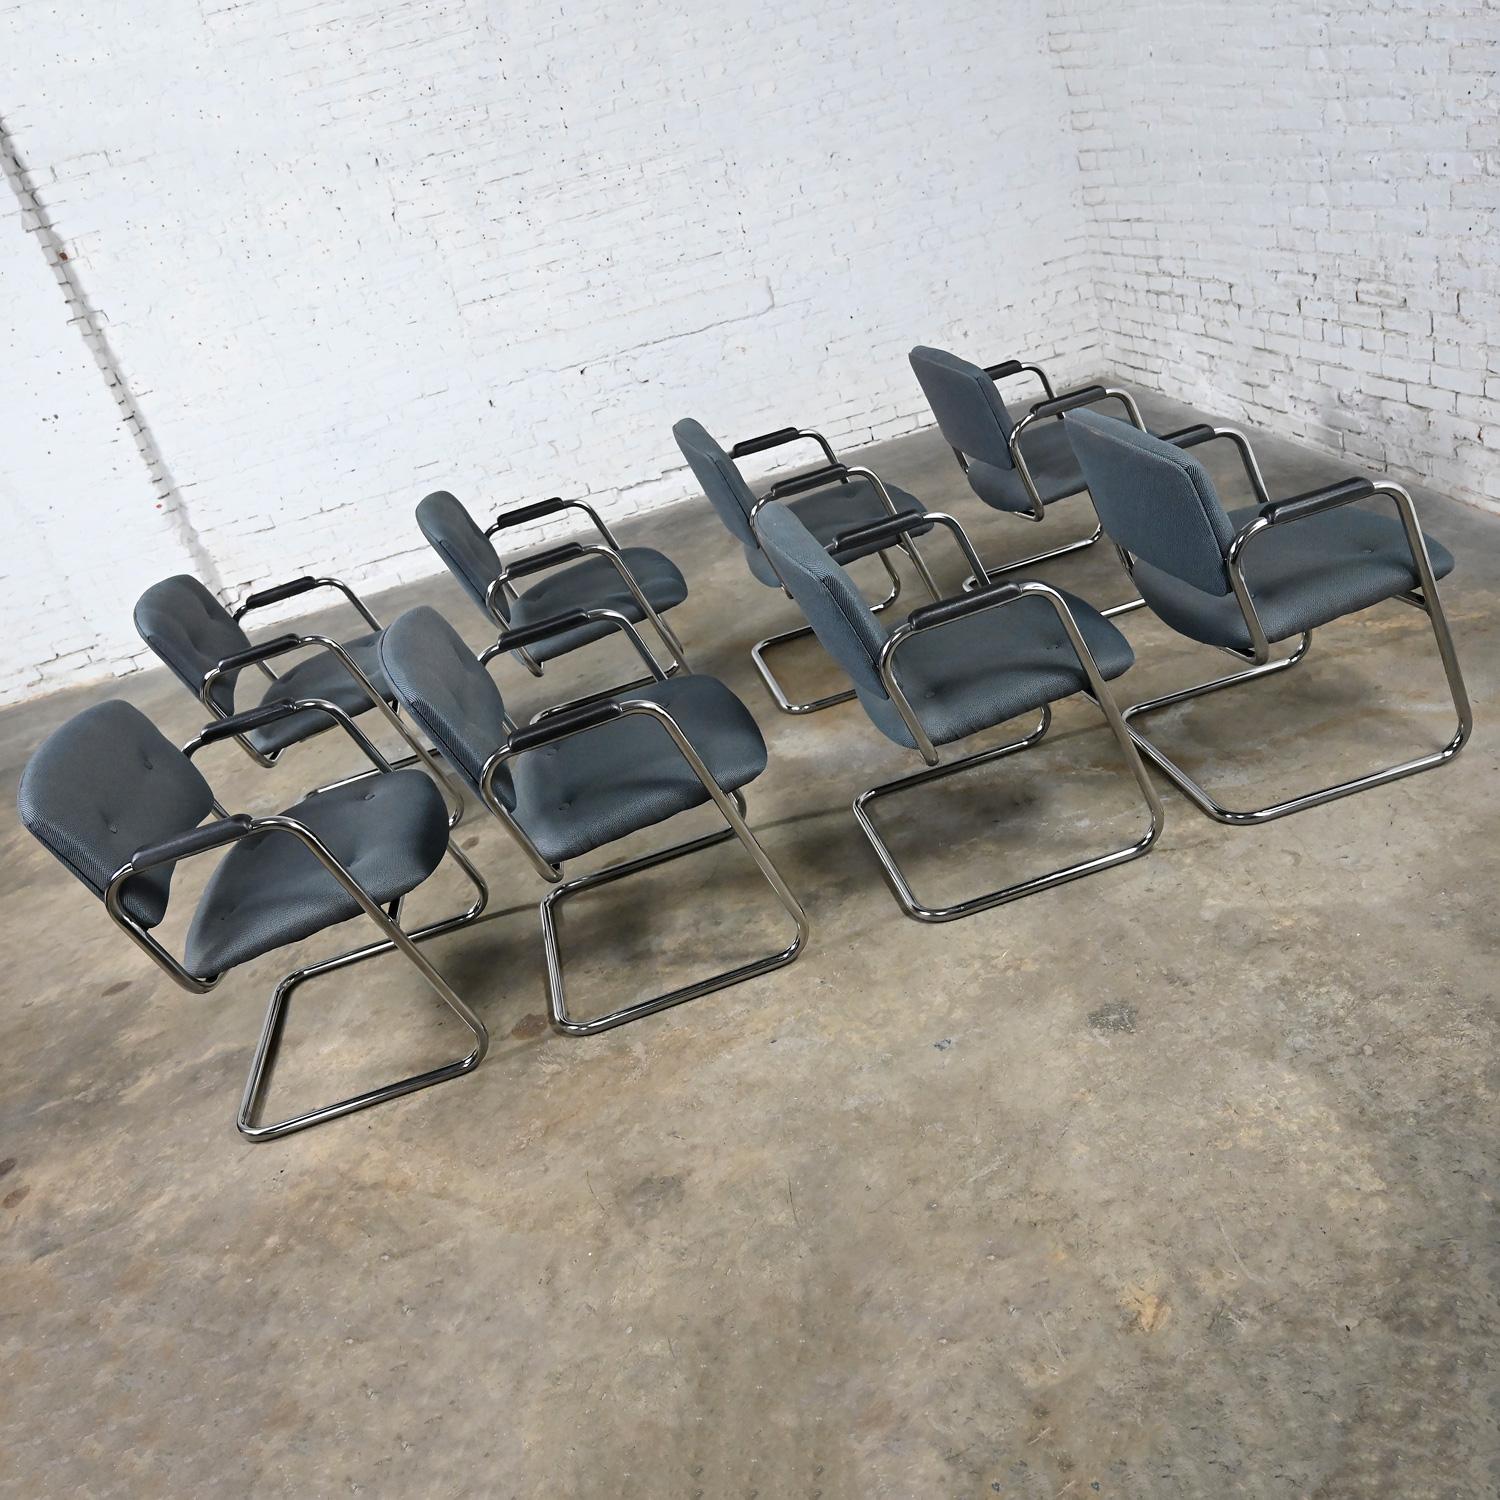 Late 20th Century Gray & Chrome Cantilever Chairs Style Steelcase Set of 8 For Sale 1